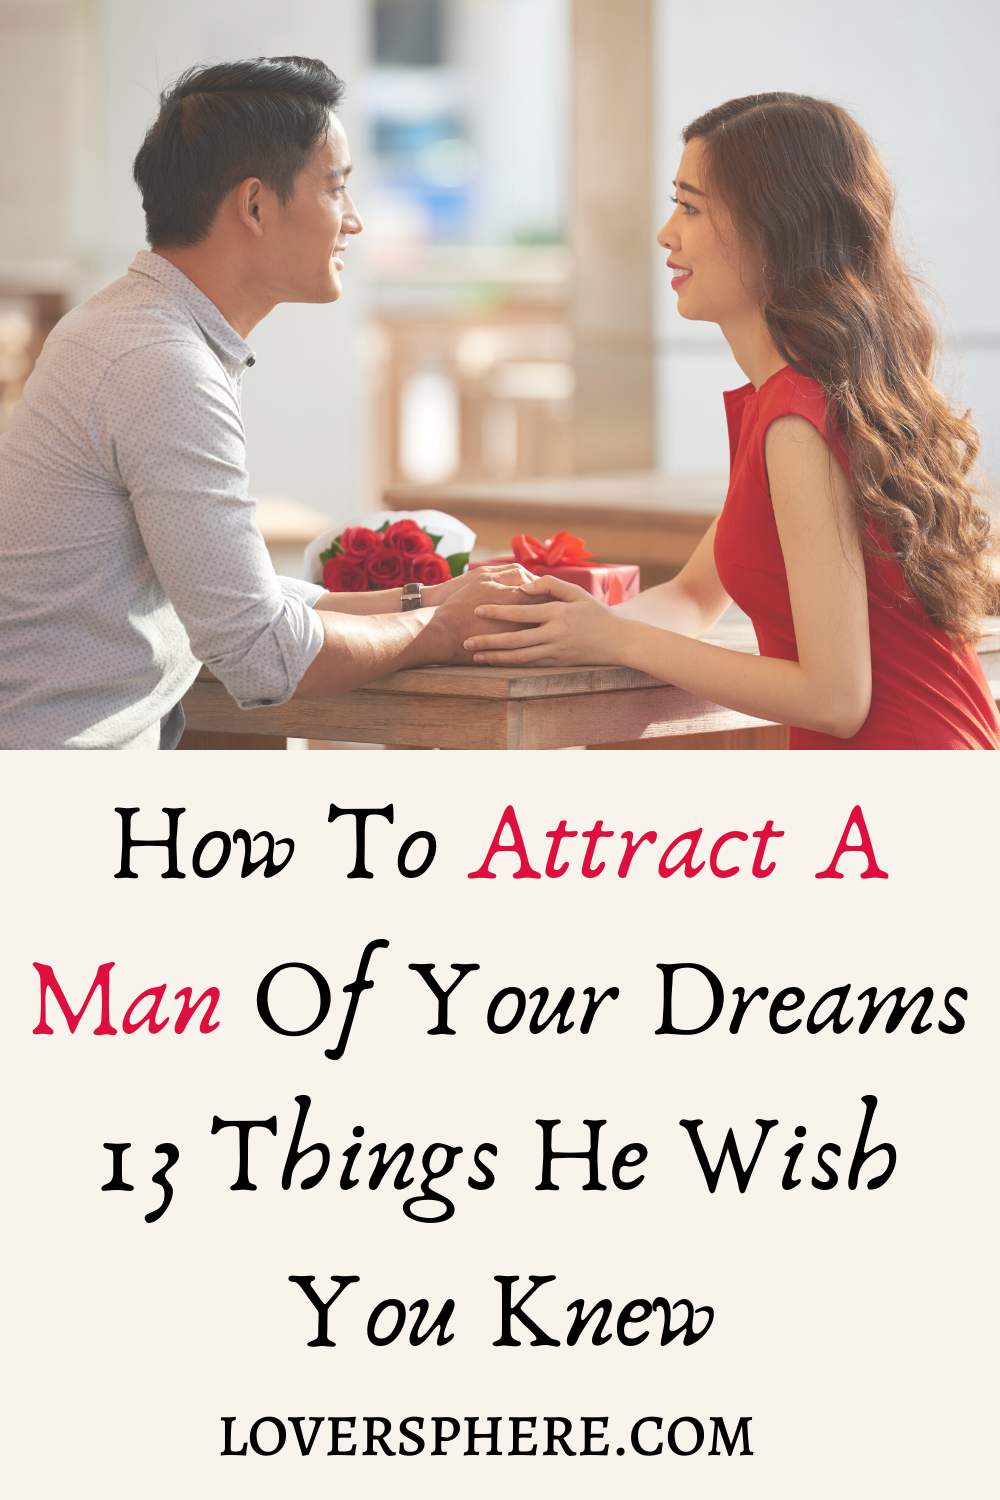 How To Attract A Man Of Your Dreams